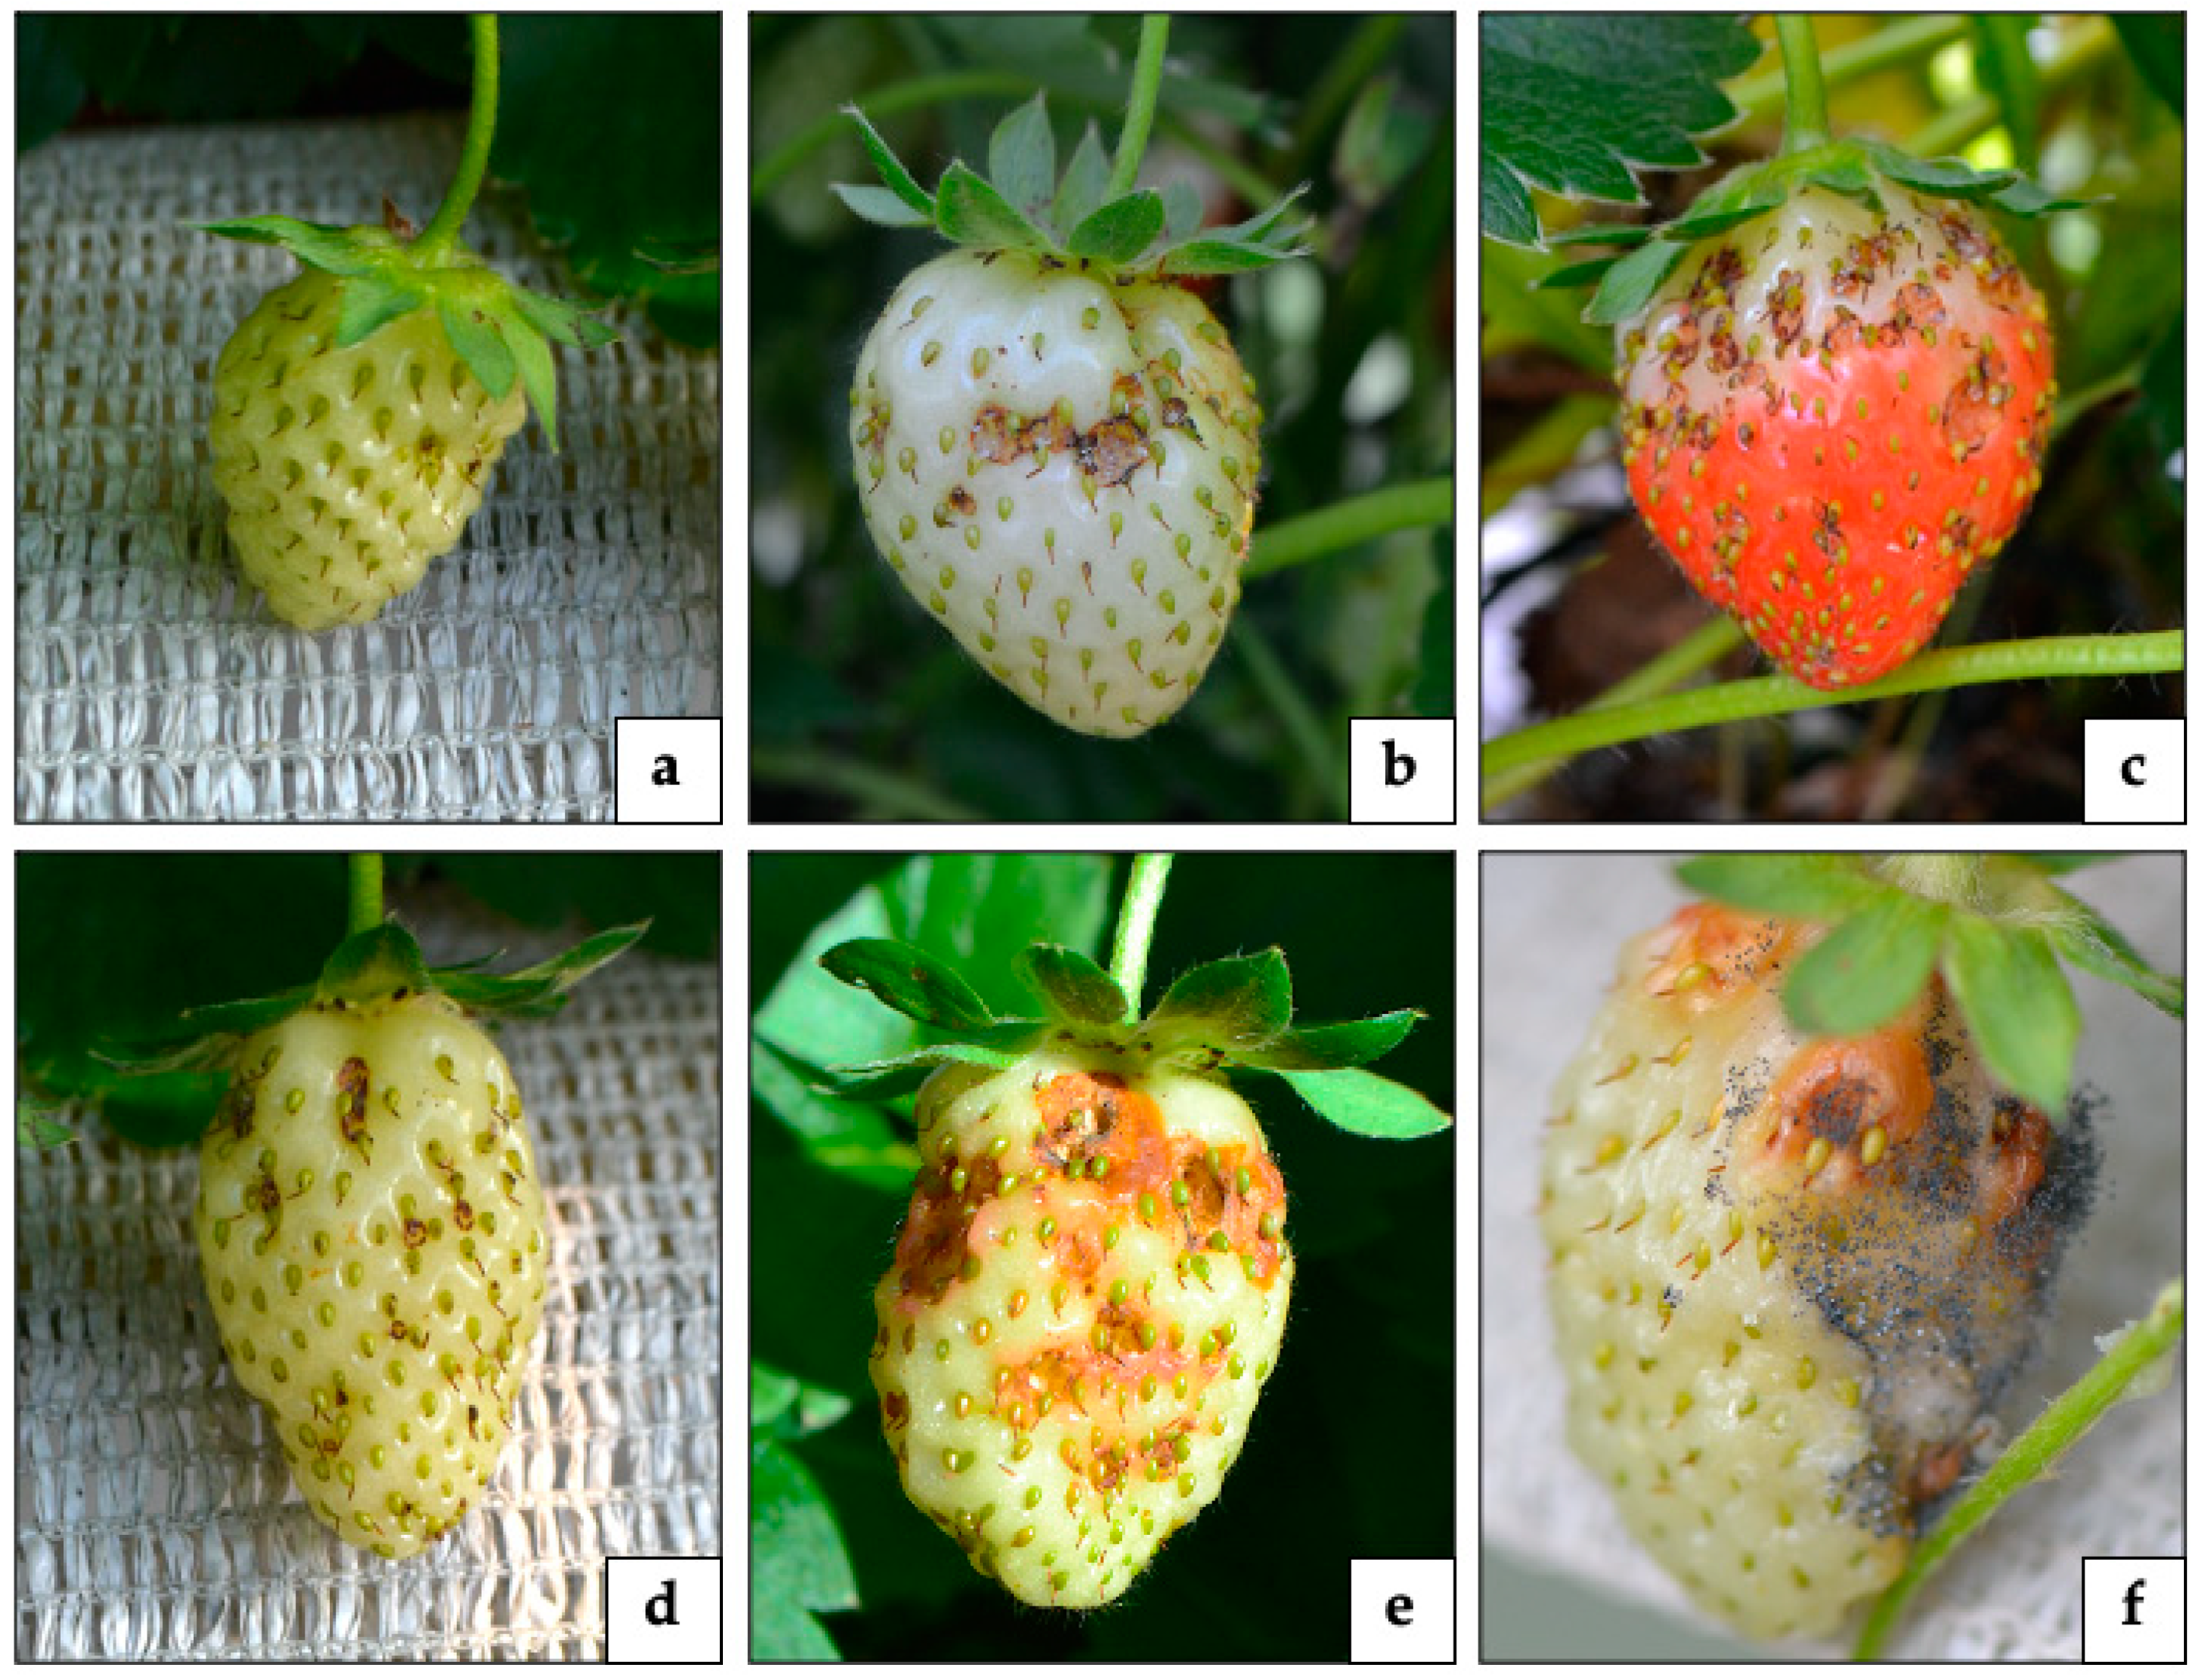 Insects | Free Full-Text | Anthonomus rubi on Strawberry Fruit: Its  Biology, Ecology, Damage, and Control from an IPM Perspective